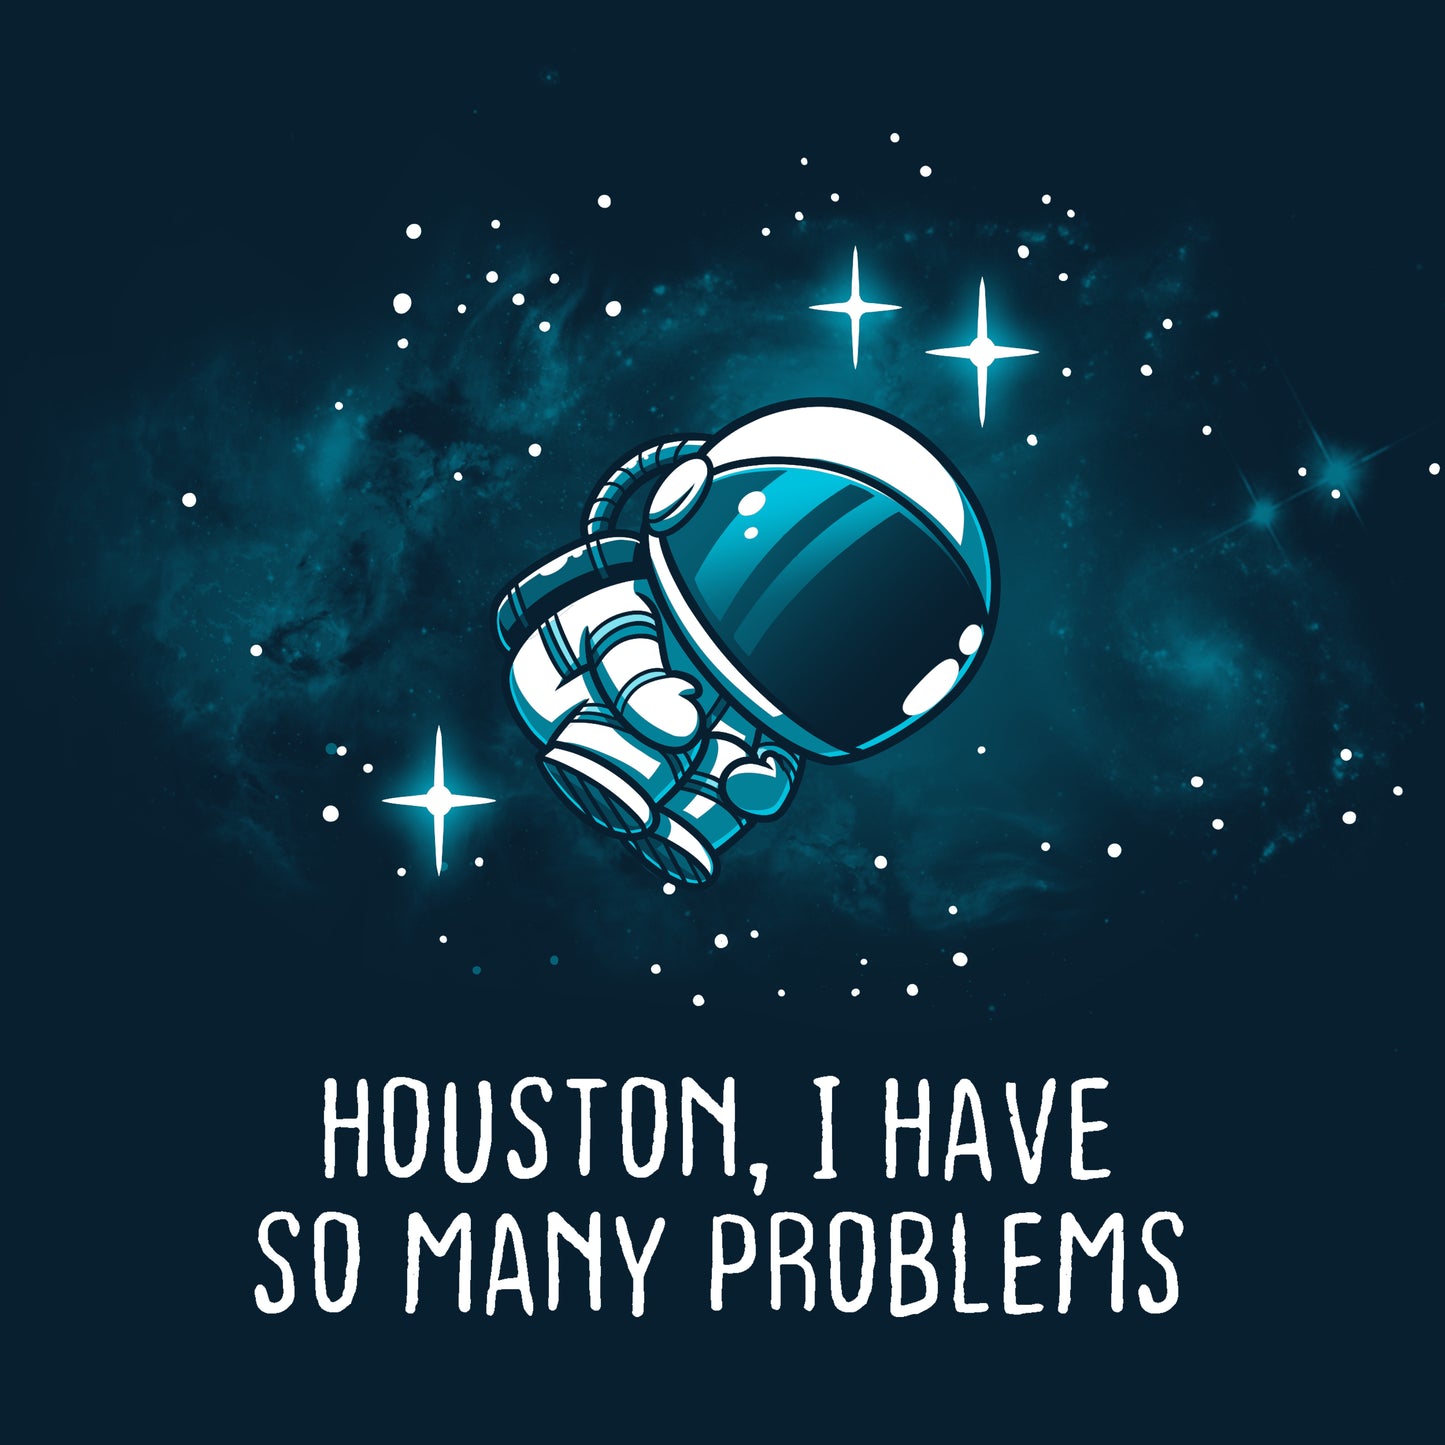 Houston, I have TeeTurtle's "Houston, I Have So Many Problems" problems.